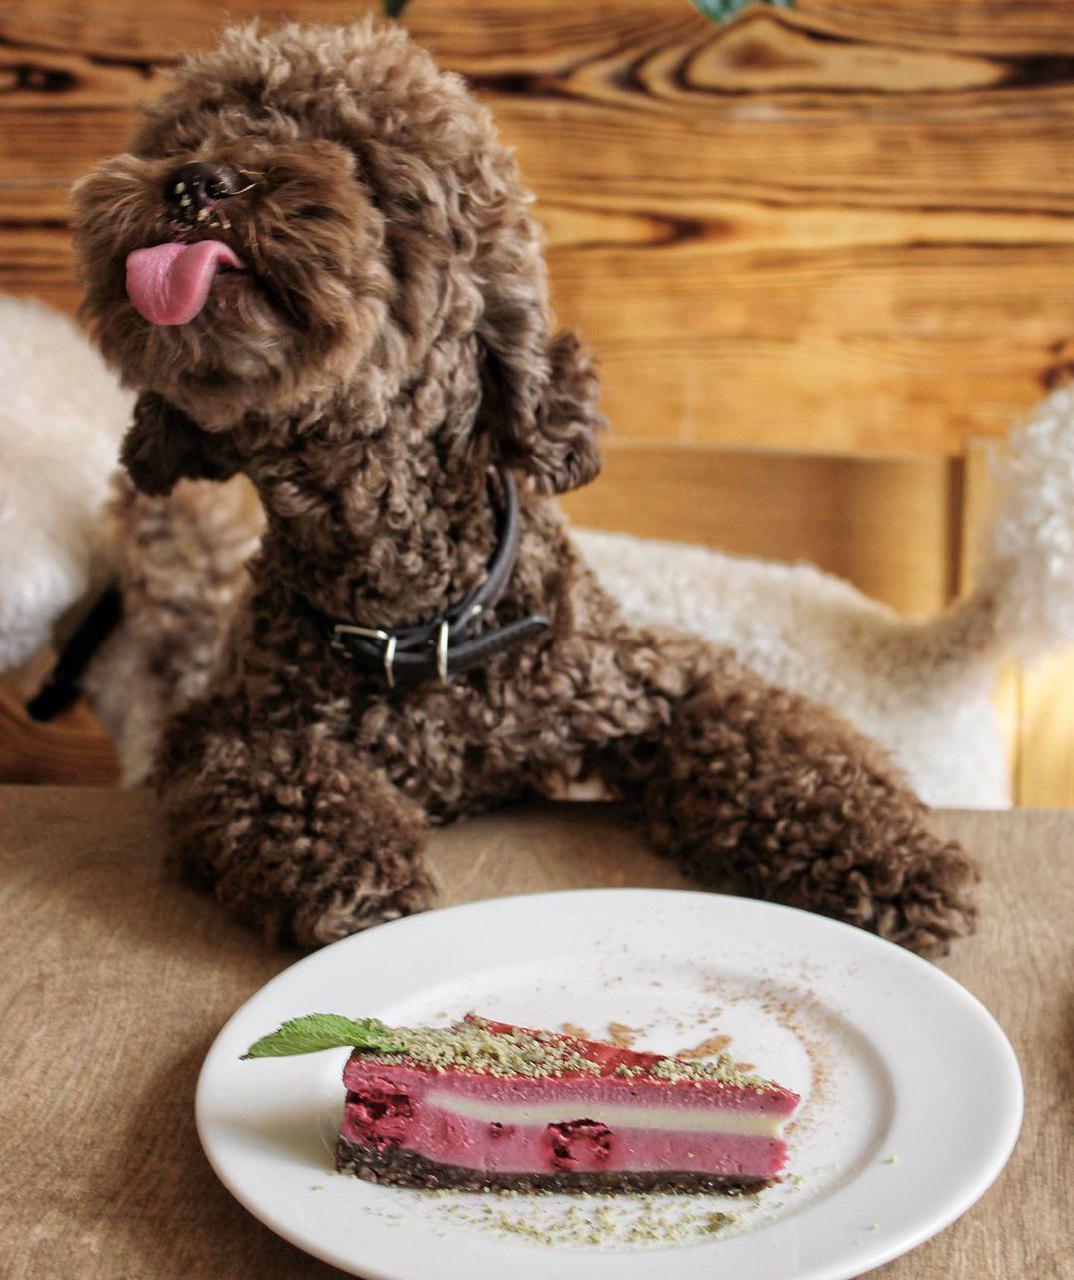 A Poodle sitting at the table while looking up and sticking its tongue out behind the cake on an plate on top of the table